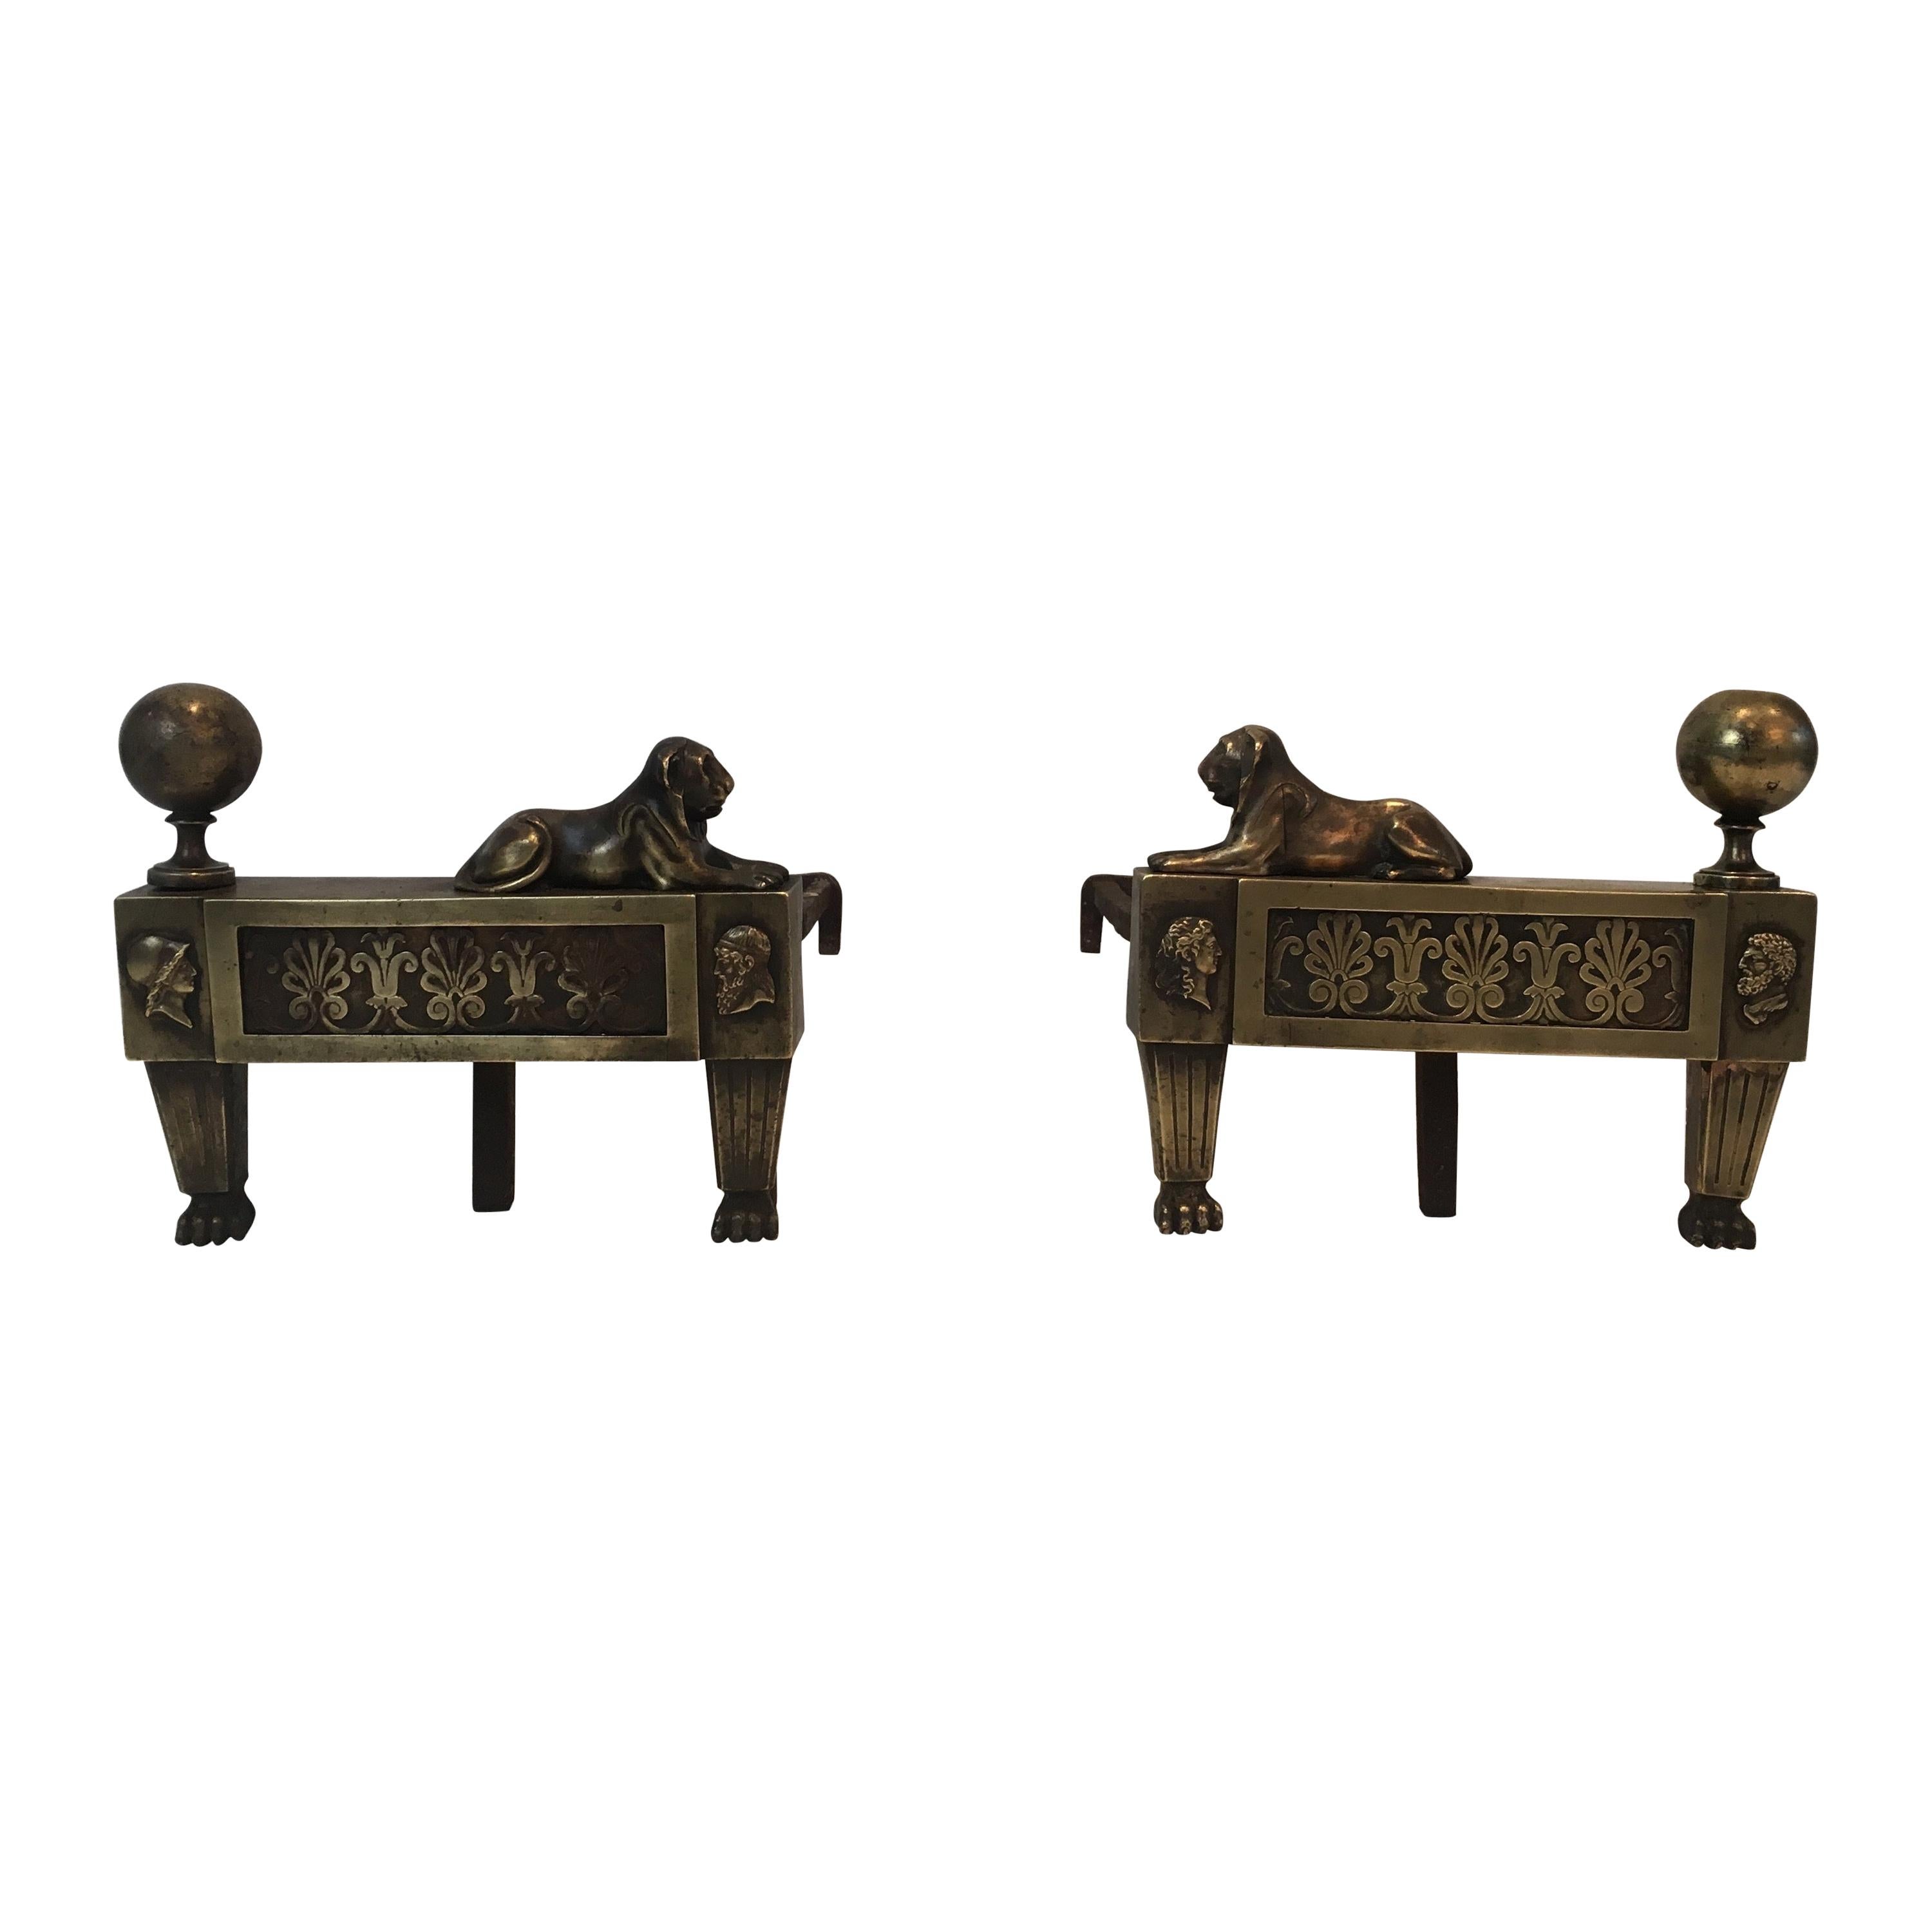 Pair of Empire Period Bronze Andirons with Lions, French, circa 1850